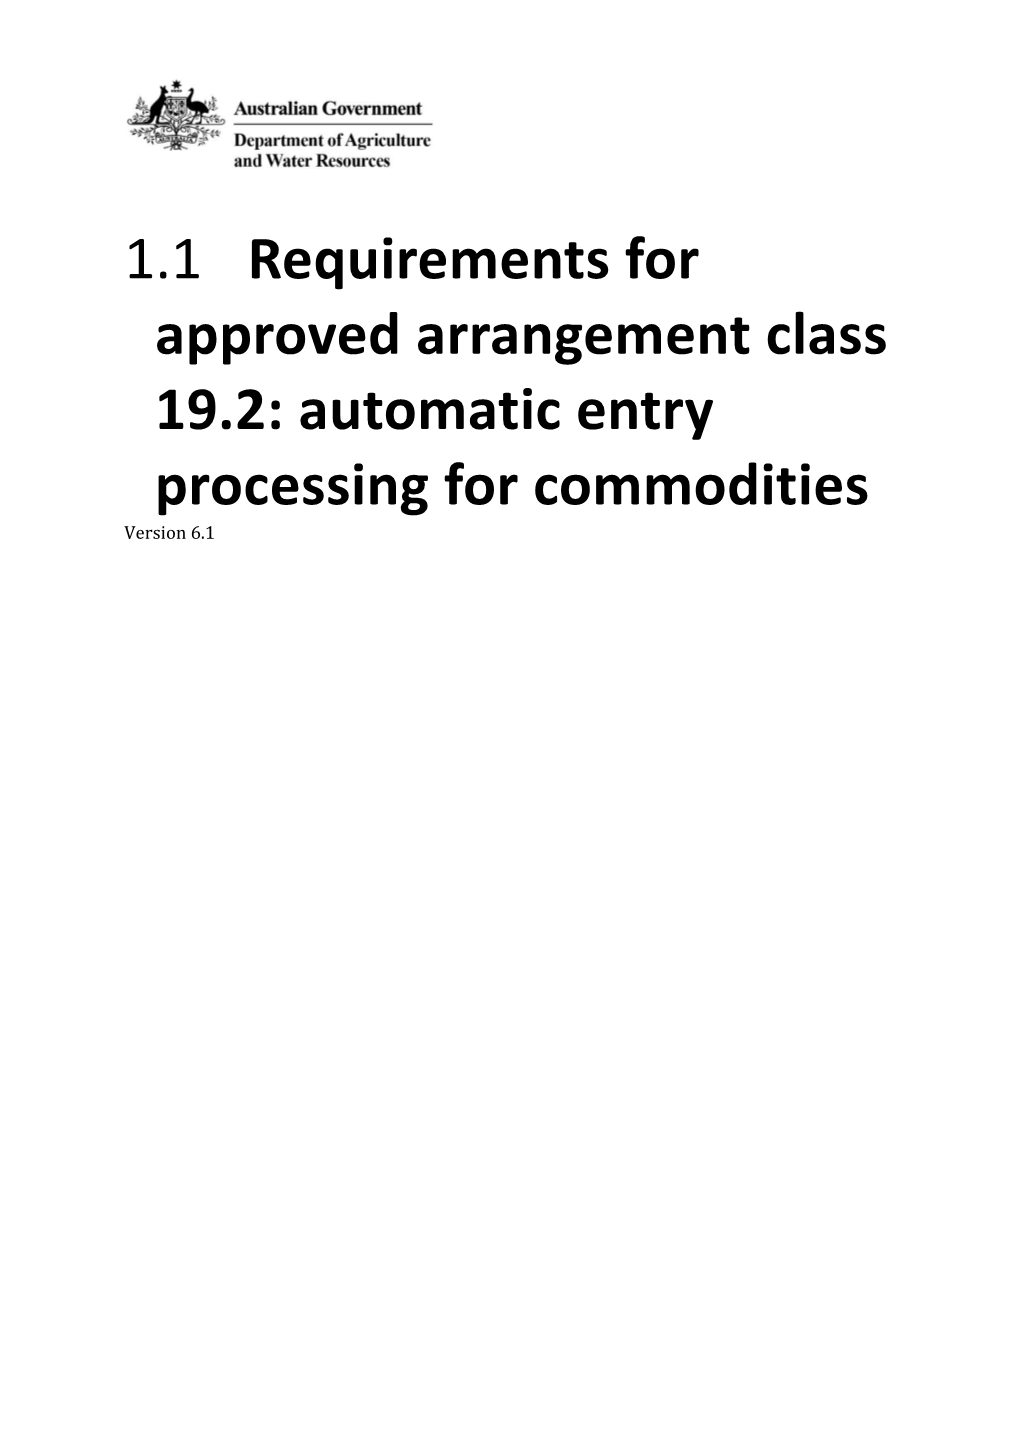 Requirements for Approved Arrangement Class 19.2: Automatic Entry Processing for Commodities